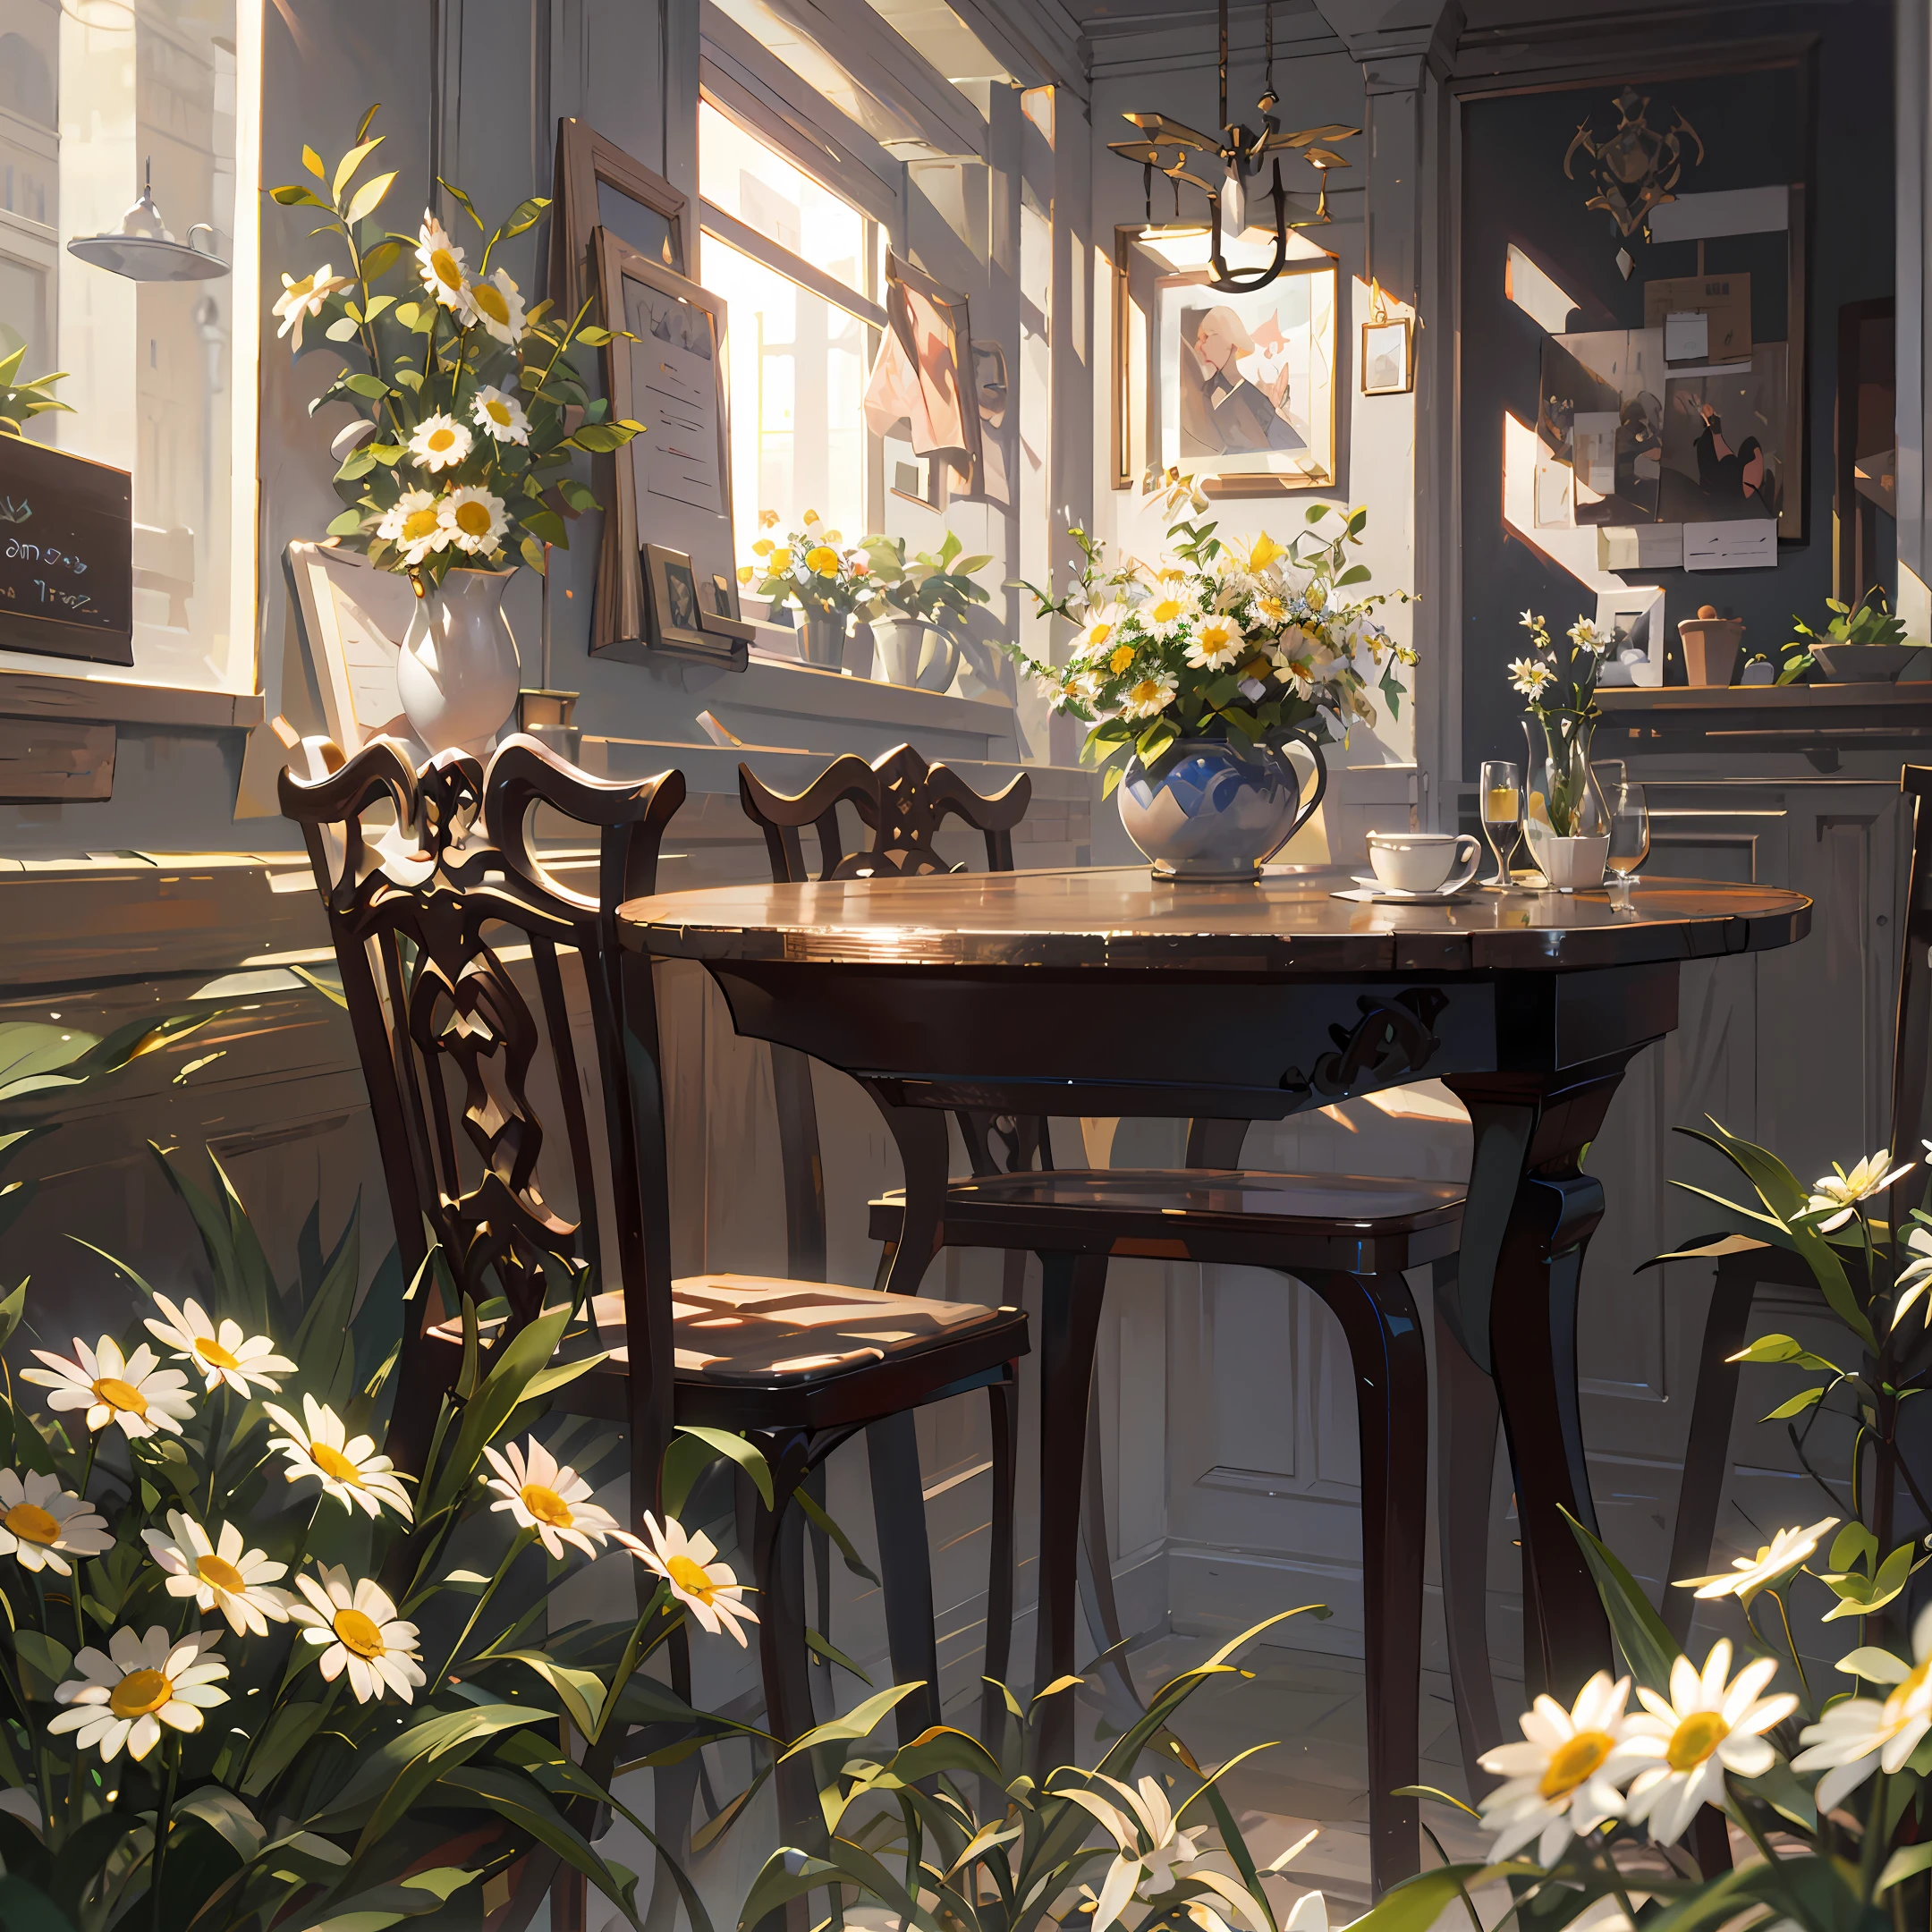 In the hush of early morning, a table at a charming café is adorned with a canvas print of daisies, casting a mesmerizing spell. The vase holds a delightful bunch of chamomile, filling the air with a soft, floral fragrance. The cheerful atmosphere is a gentle invitation to savor the moment. As the flowers bloom in the background, the cozy café setting comes alive with tranquil beauty, creating a highly detailed composition akin to a photoreal render